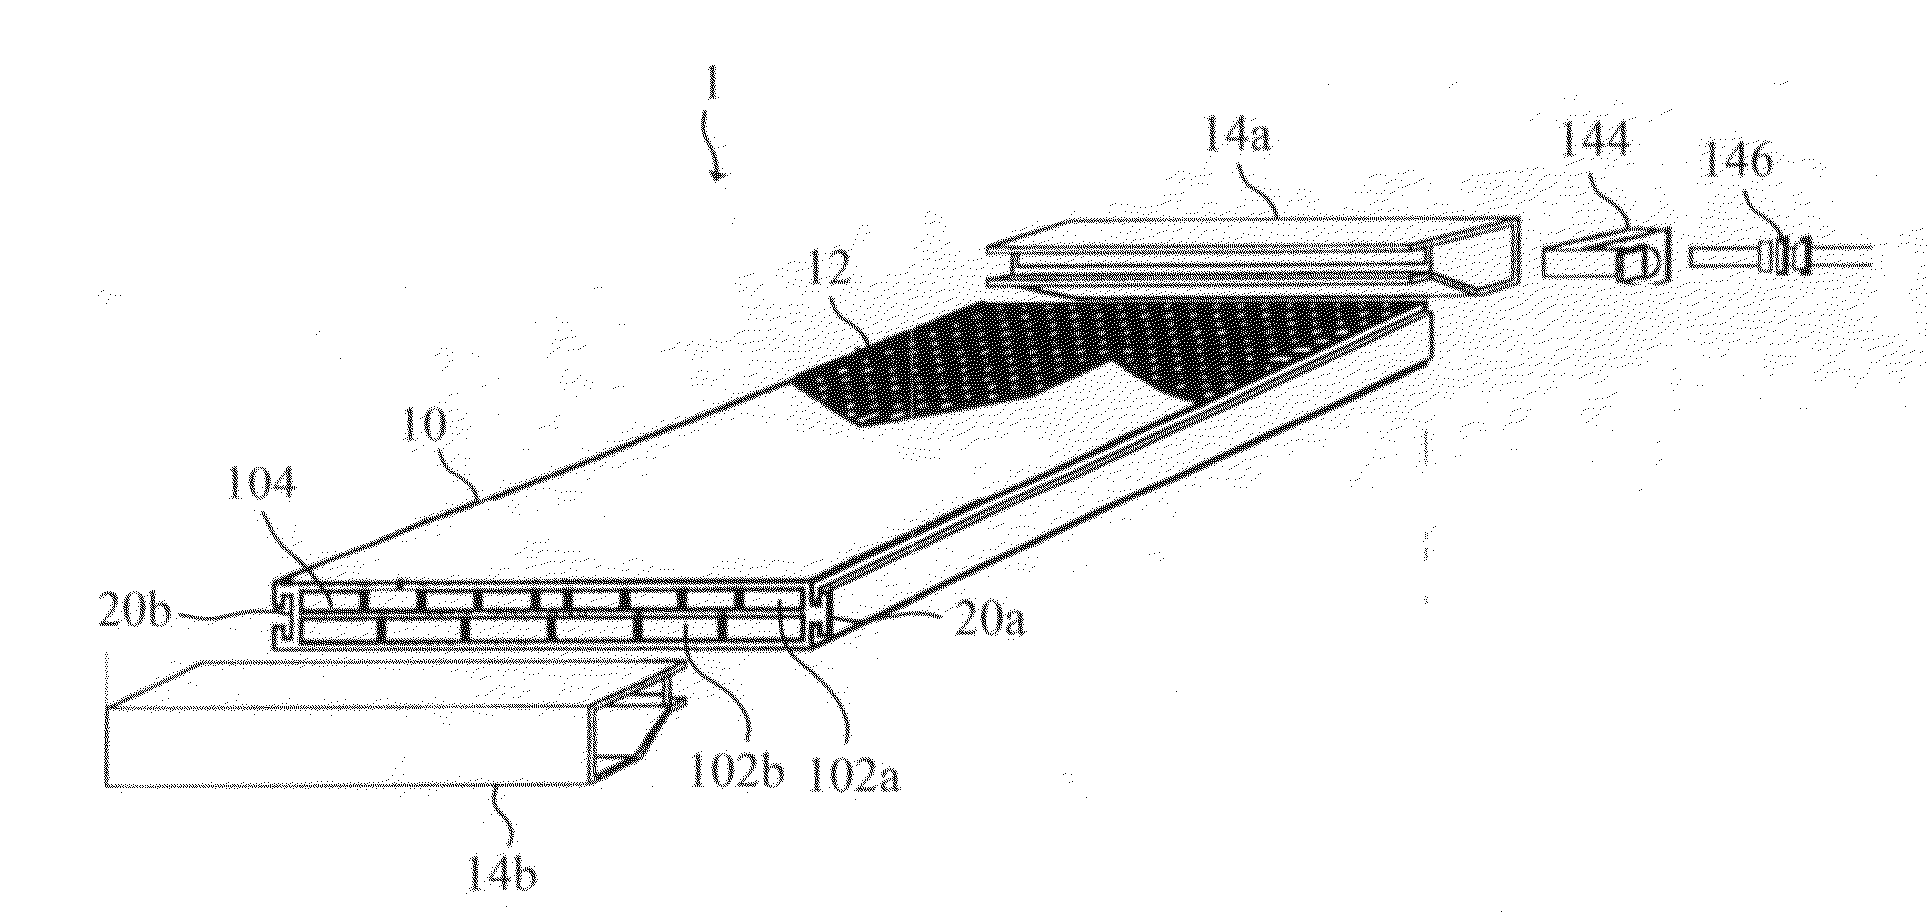 Self-contained, multi-fluid energy conversion and management system for converting solar energy to electric and thermal energy